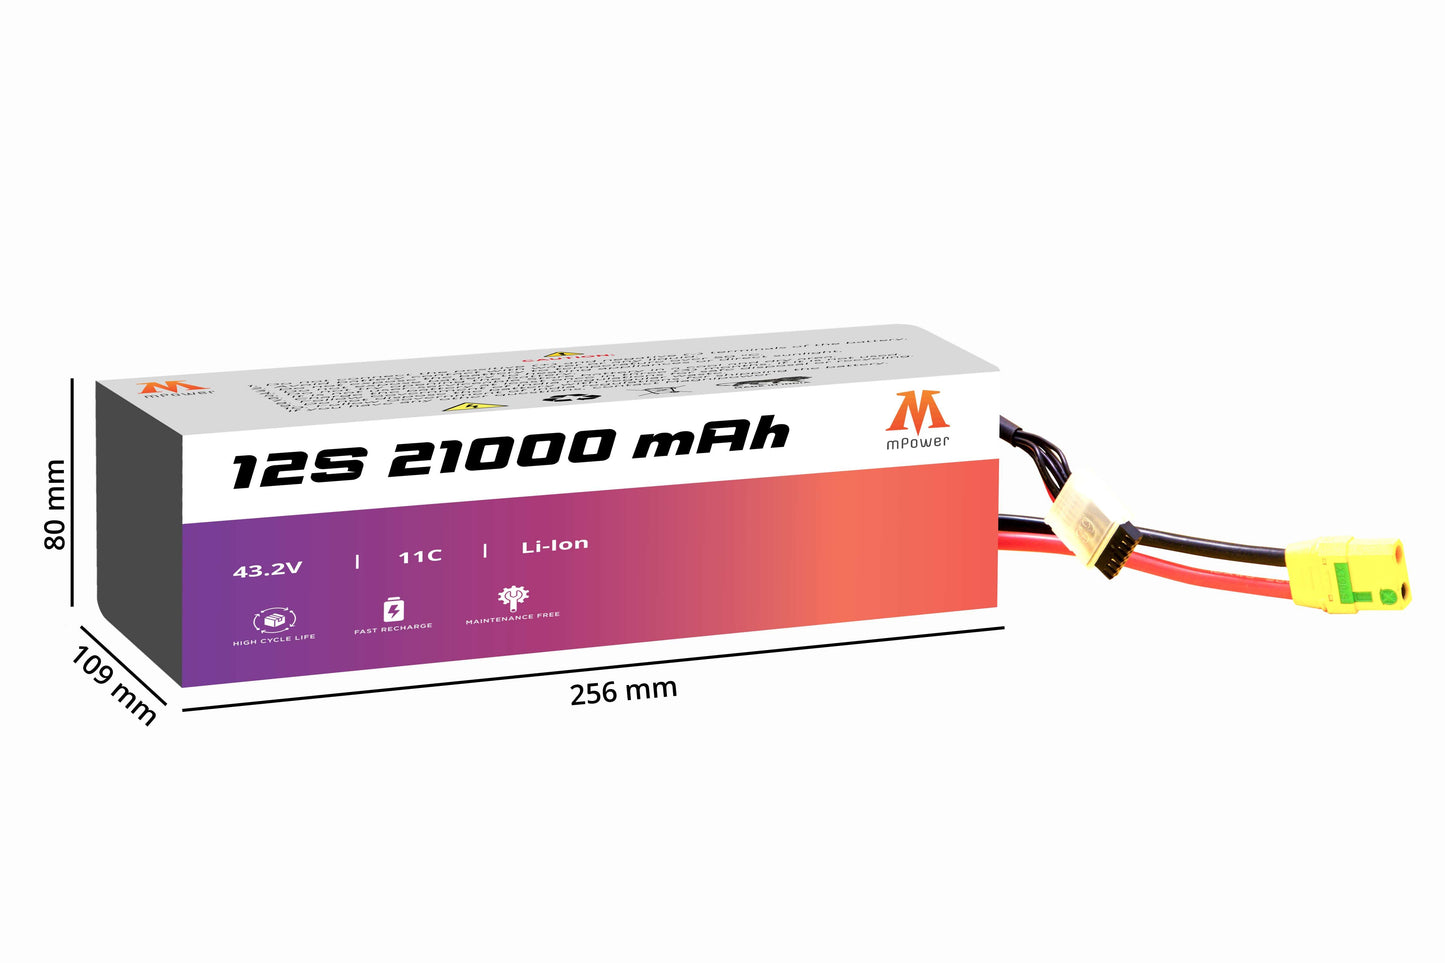 mPower 12S 21000mAh Lithium-Ion Battery for Agricultural Spraying Drones-mpowerlithium